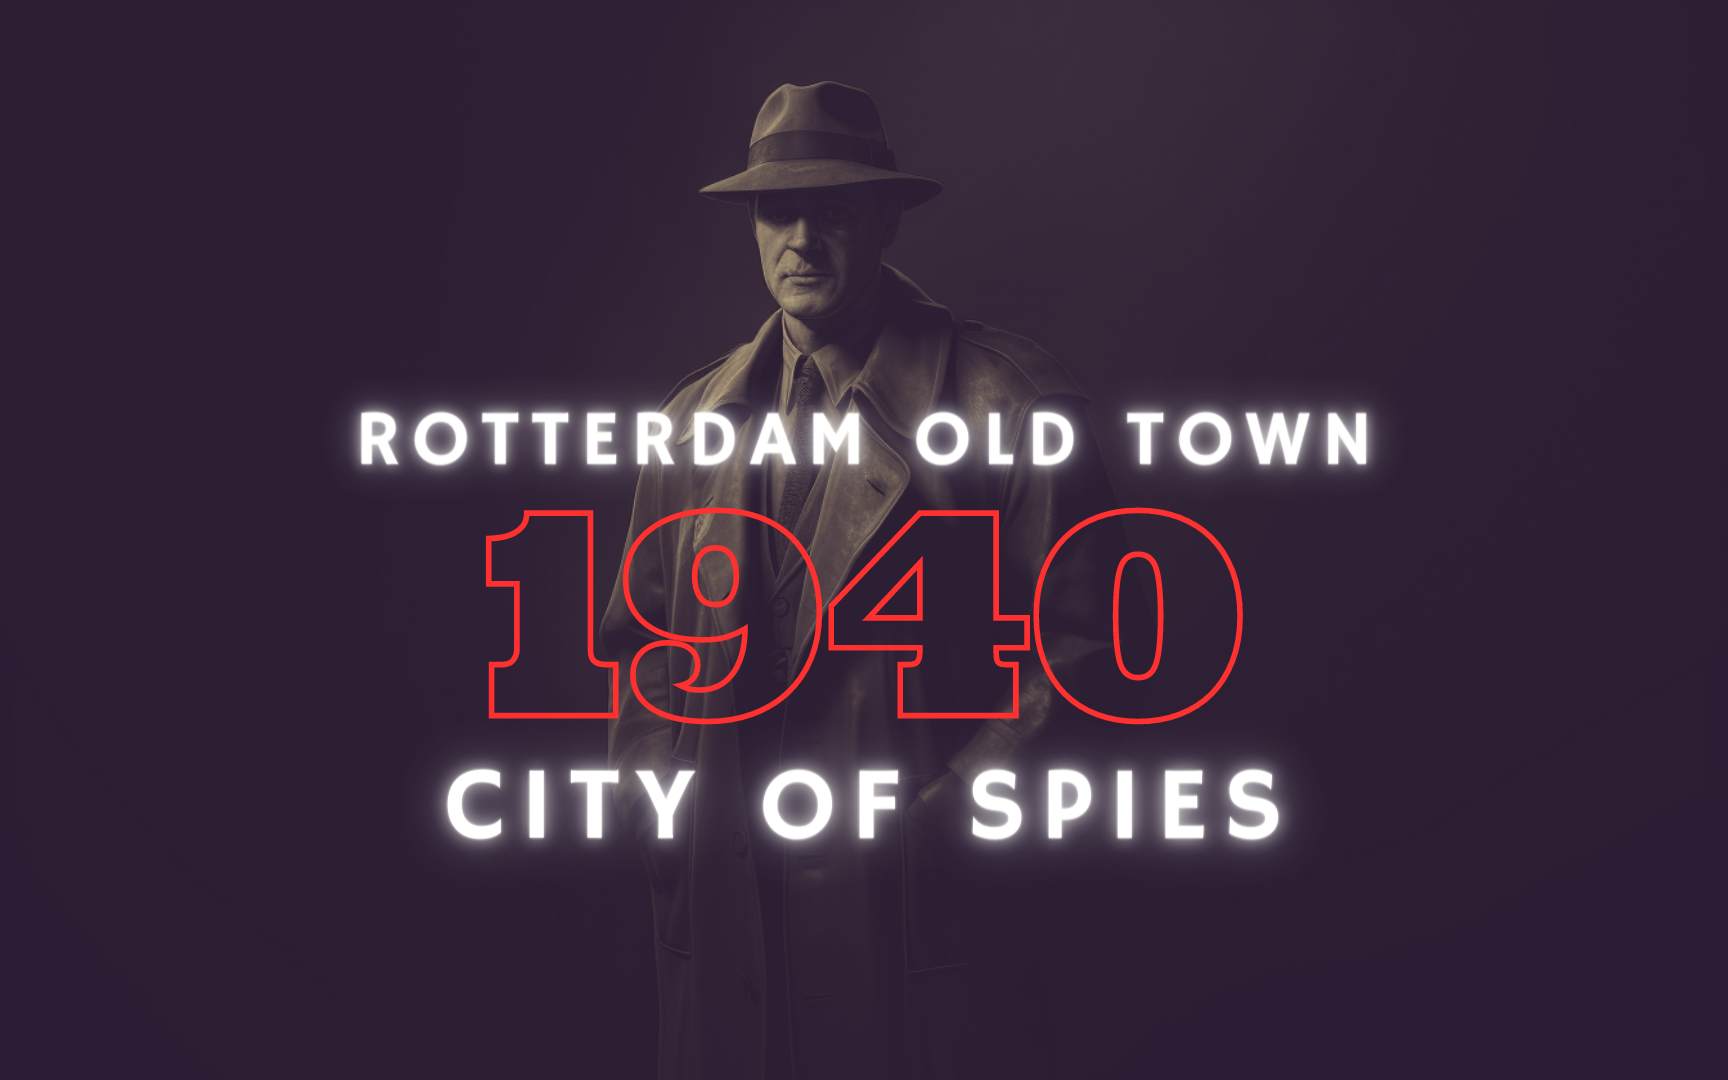 Rotterdam Old Town: City of Spies image